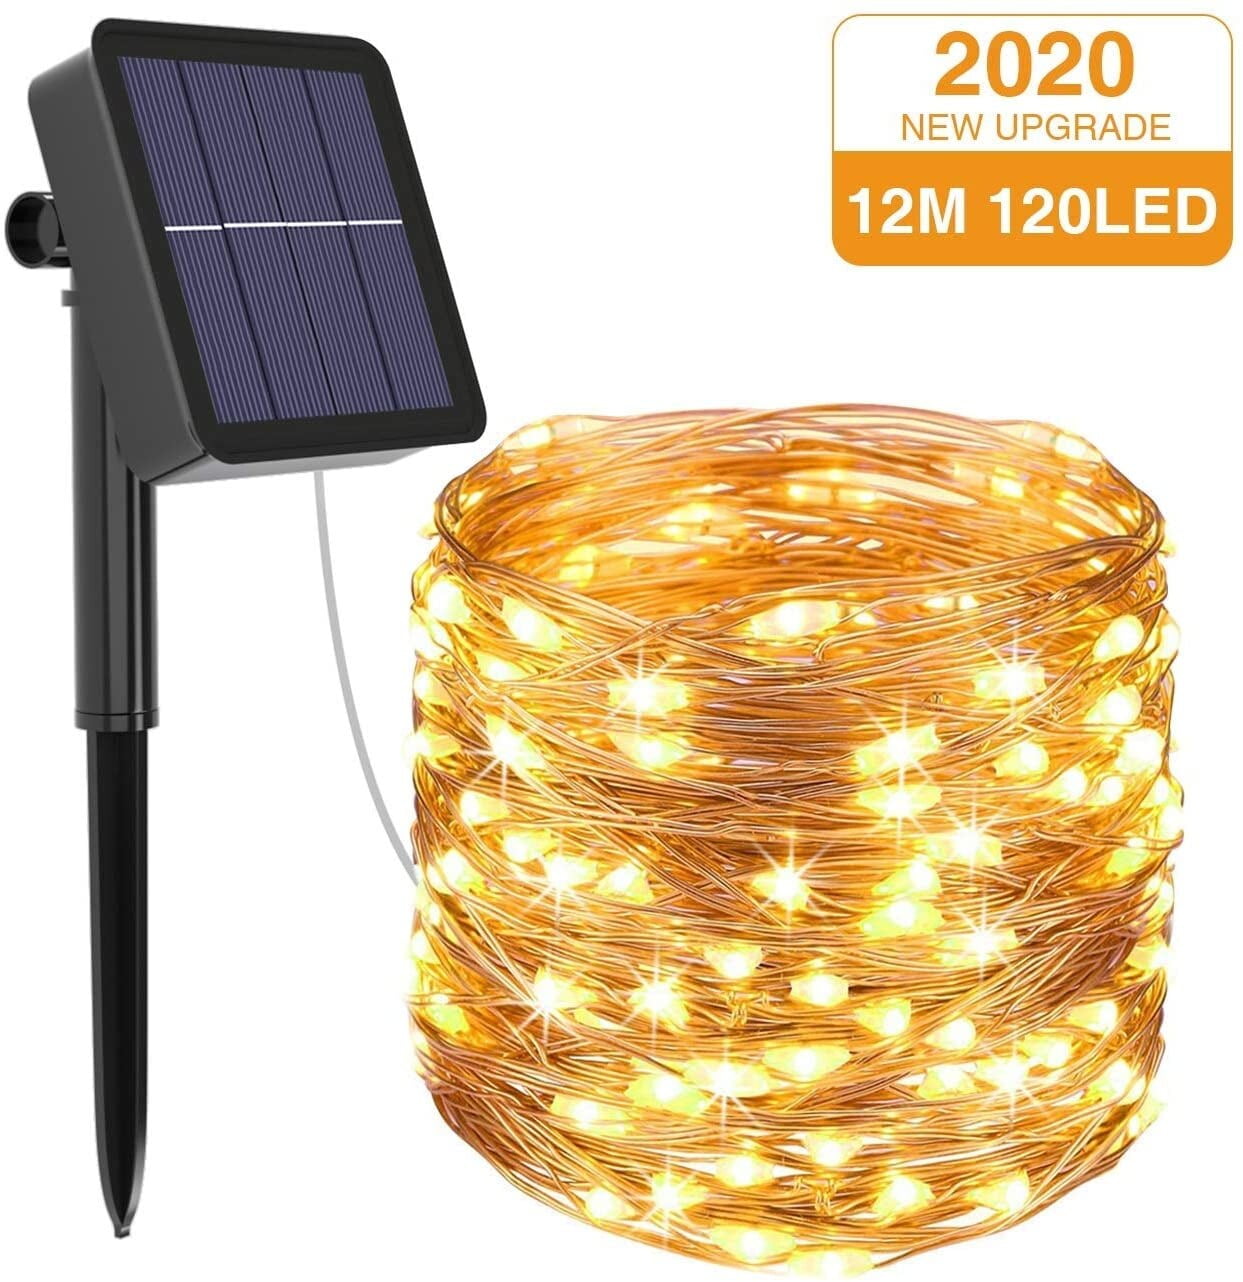 10M Solar String Lights 100 LED Copper Wire Outdoor Lamp Party Festival Decor 